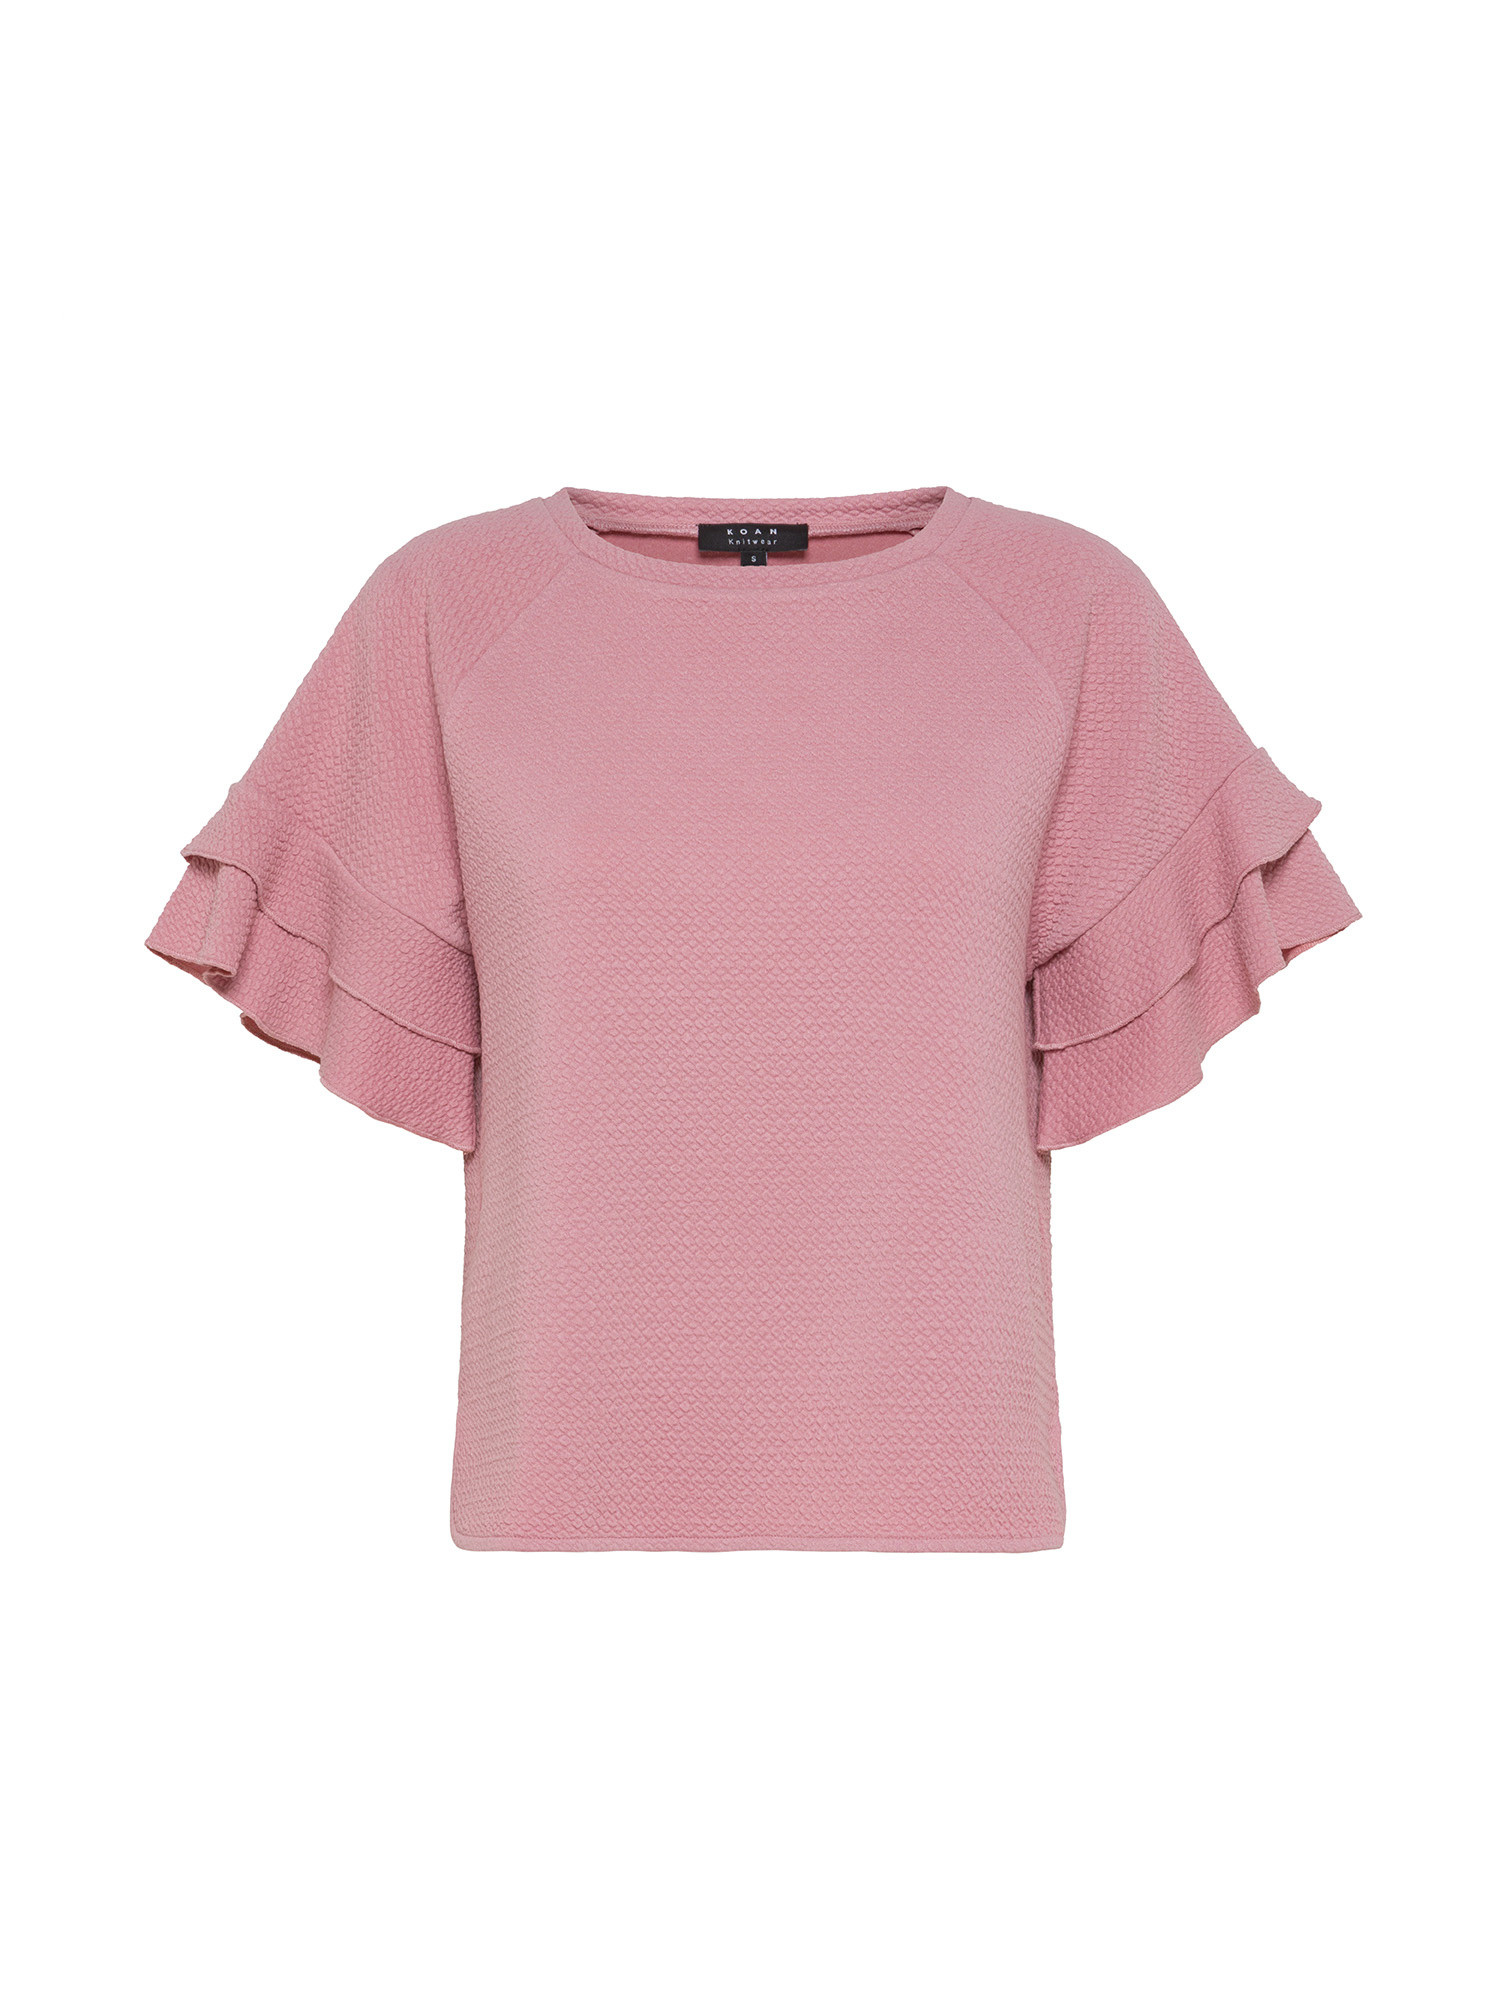 Koan - T-shirt con rouches, Rosa, large image number 0